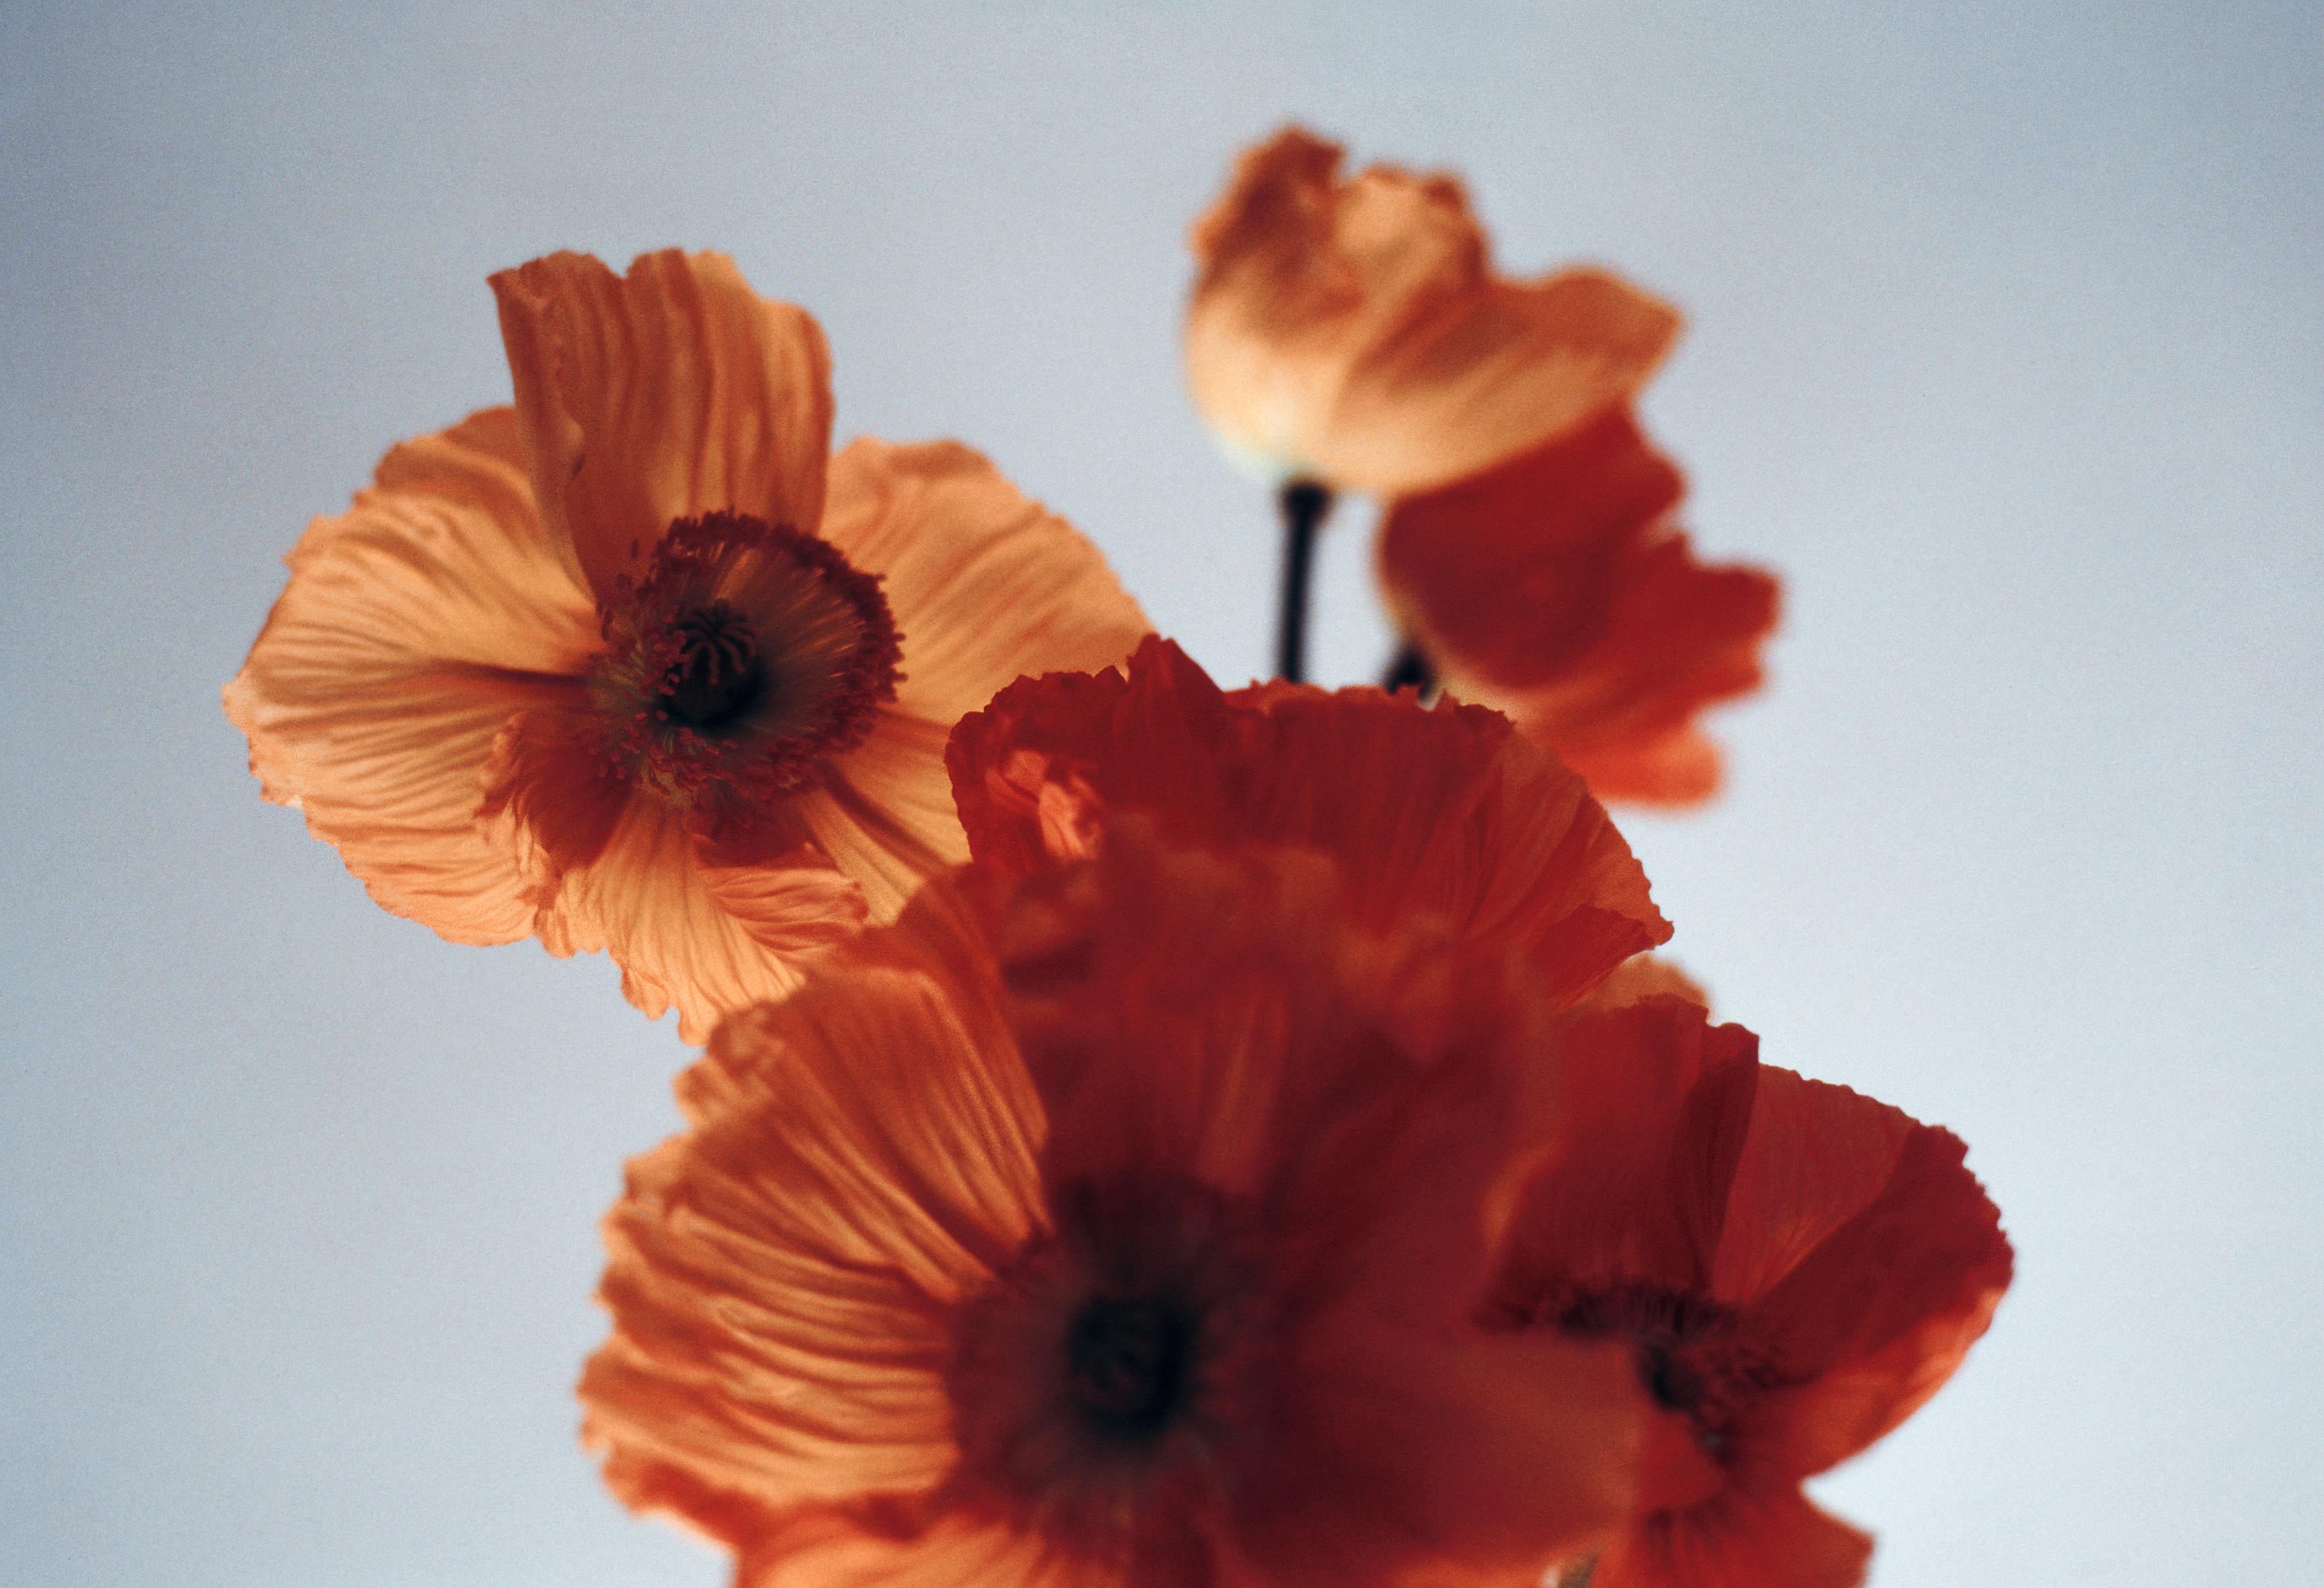 Ugne Pouwell Color Photograph - Orange Poppies - Analogue floral photography, Limited edition of 20